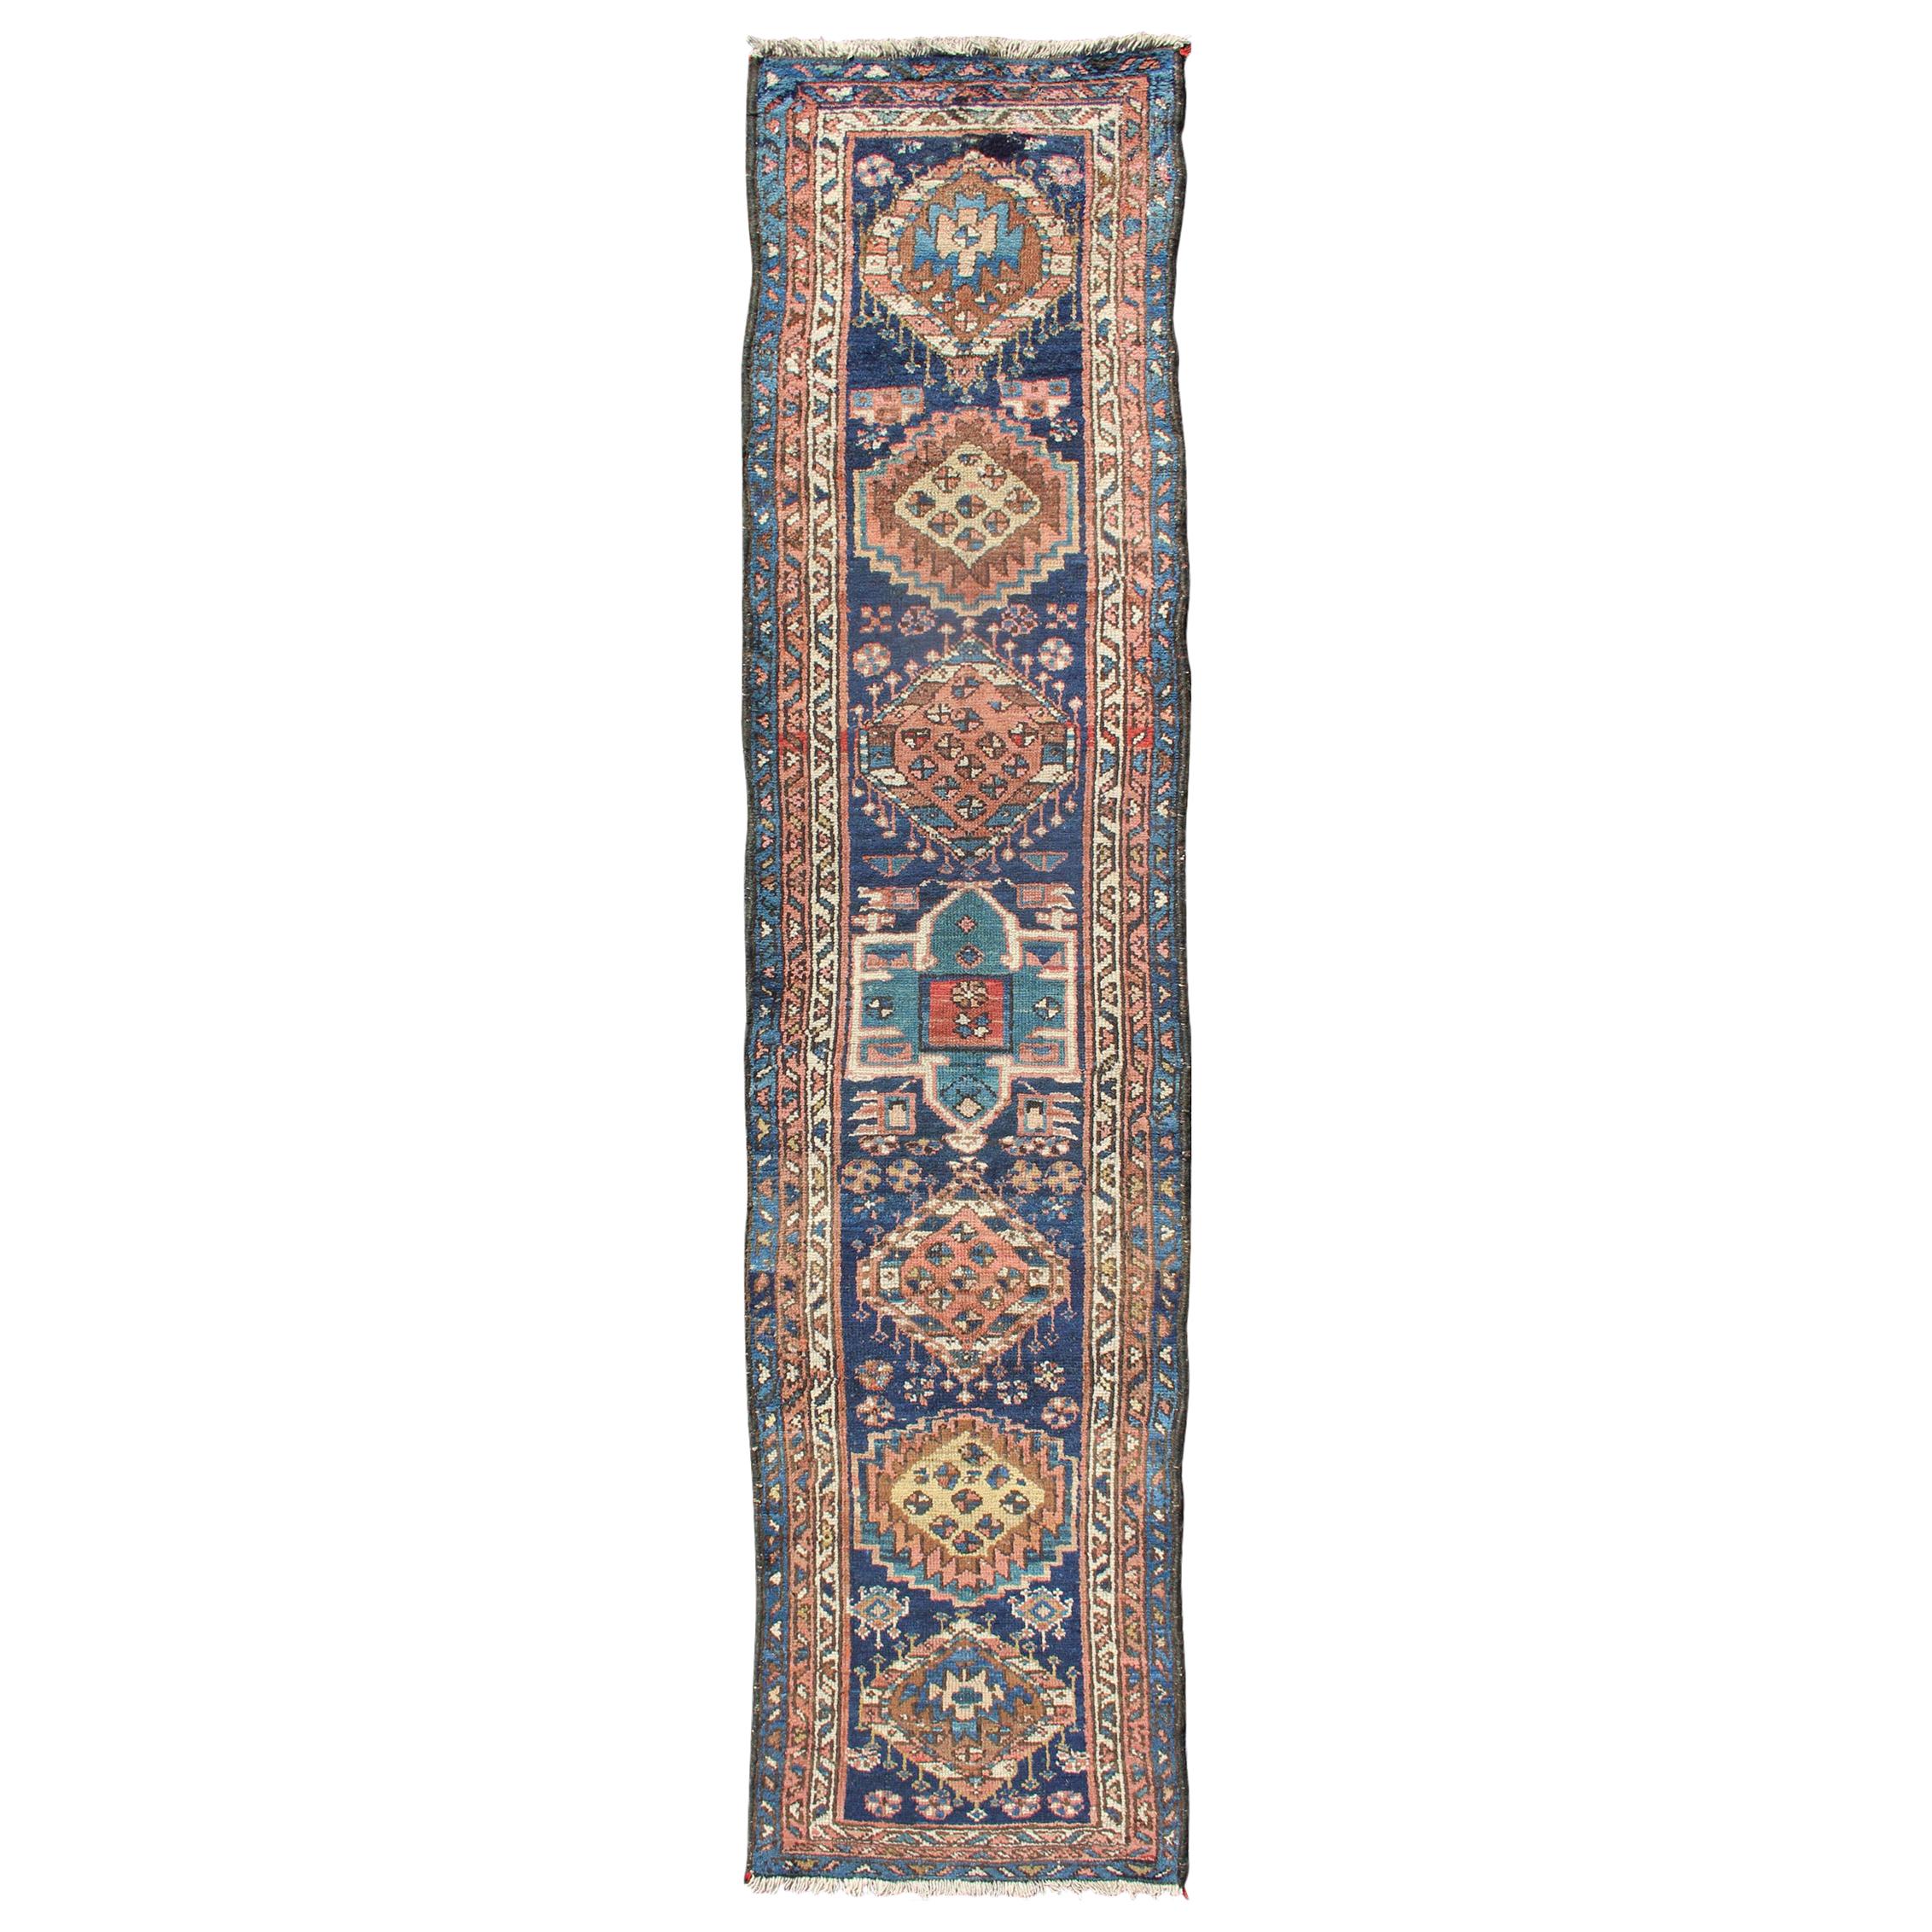 Colorful Persian Antique Karajeh Runner in Blue and Brown